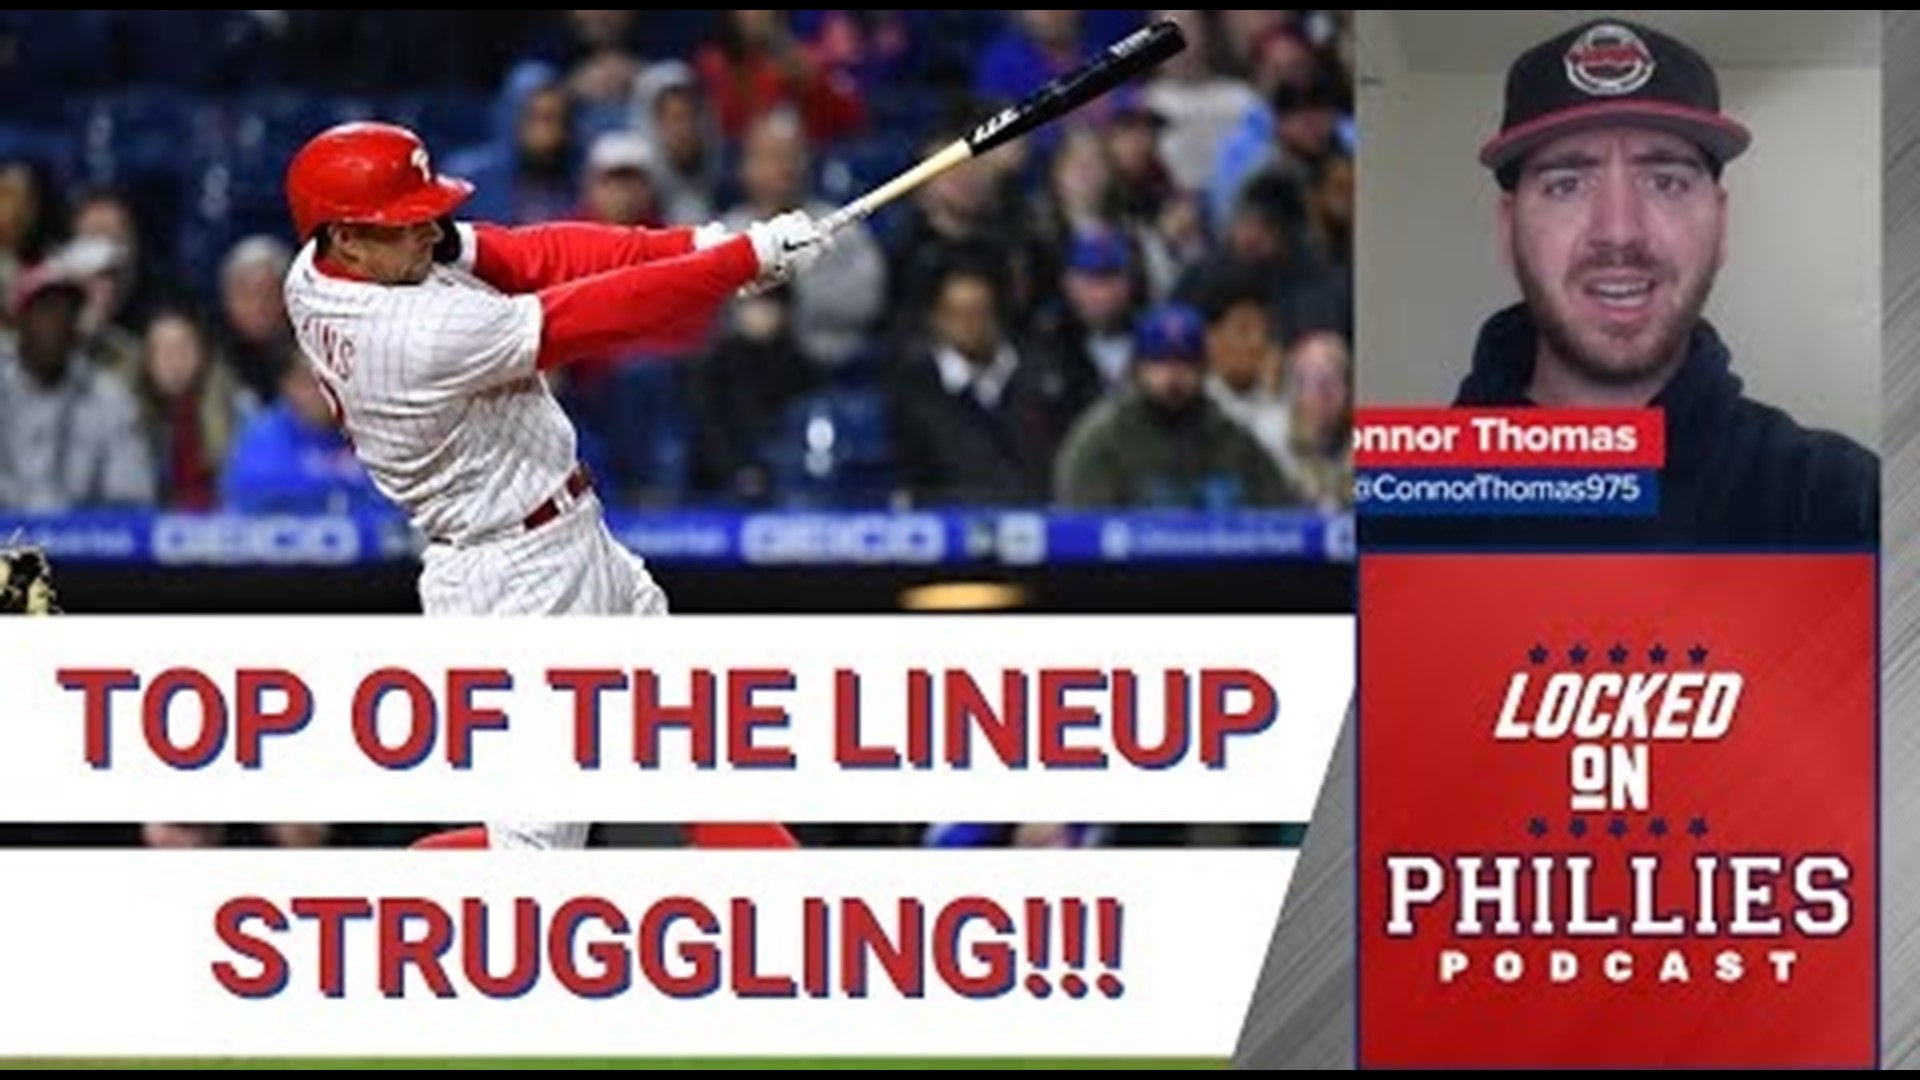 In today's episode, Connor discusses the biggest issues plaguing the Philadelphia Phillies down the stretch of their season as they fall to the Chicago Cubs.